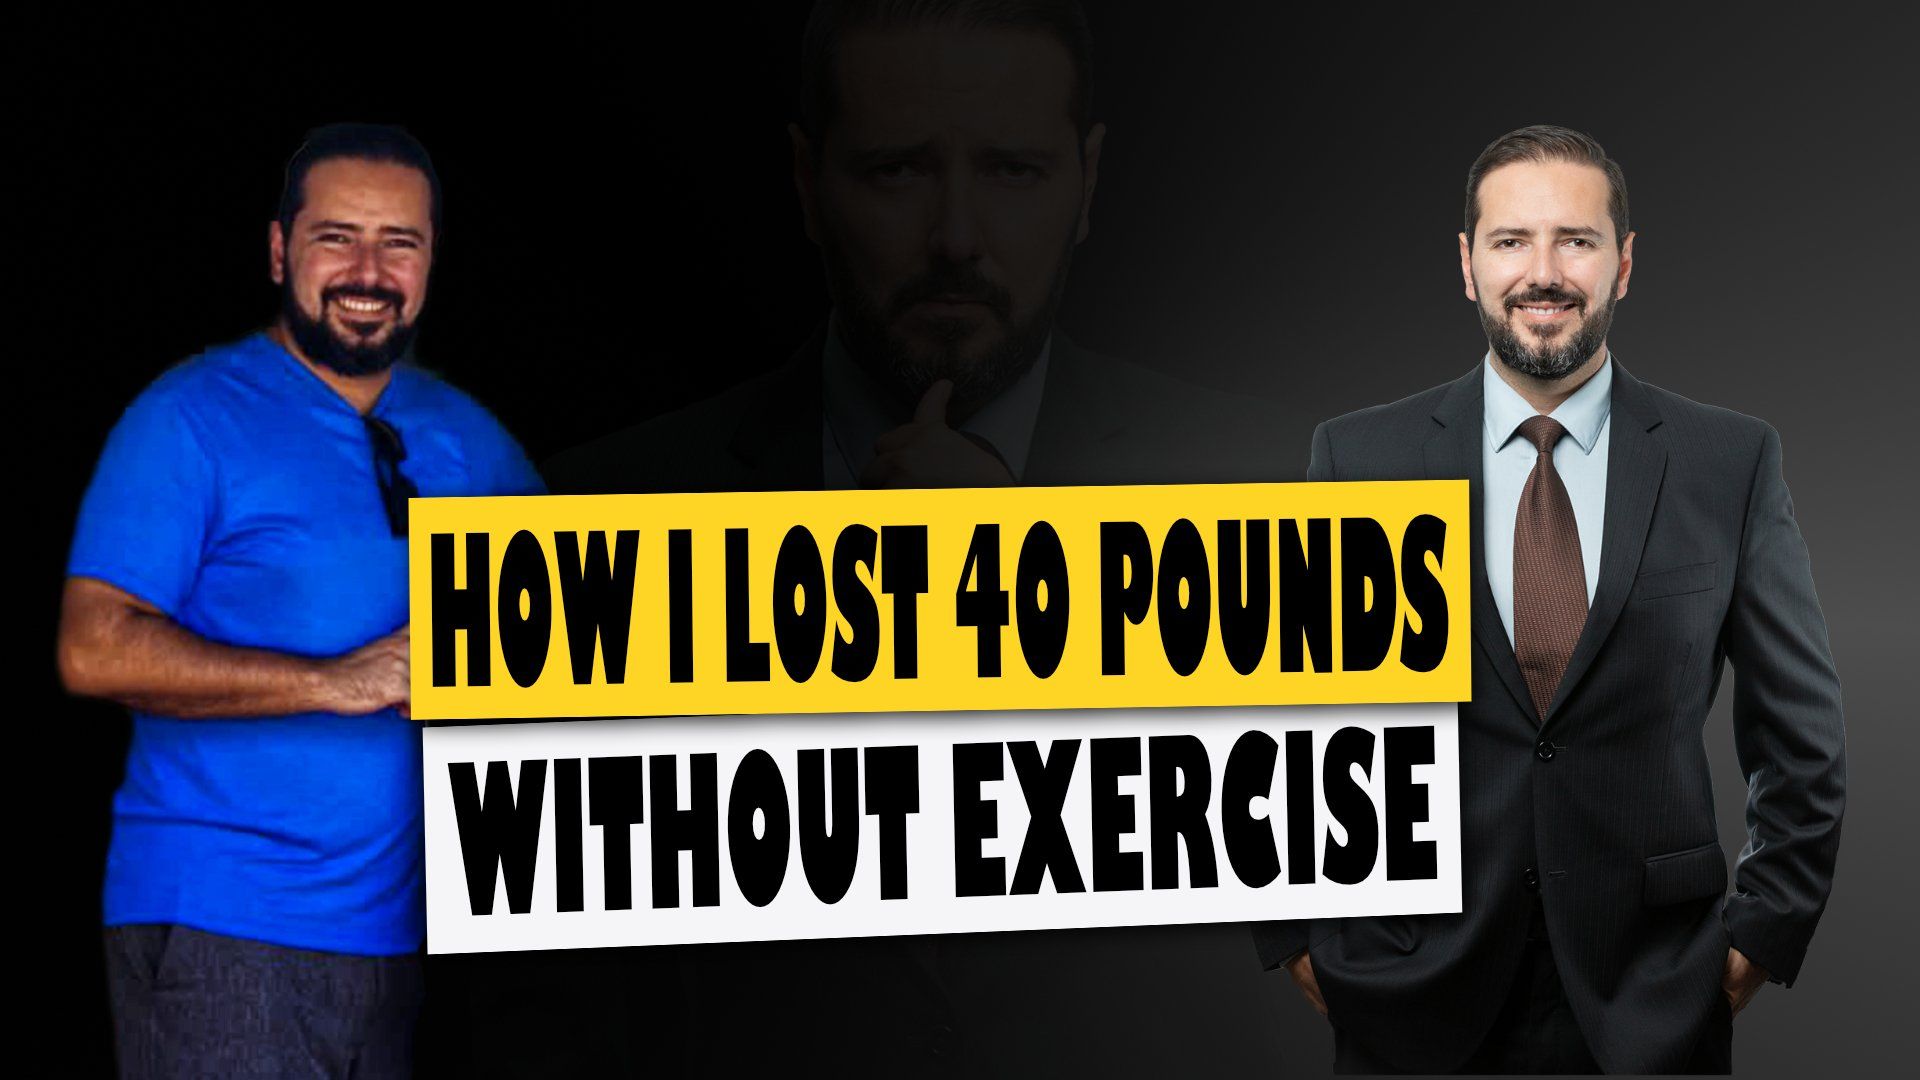 How I lost 40 pounds without exercise